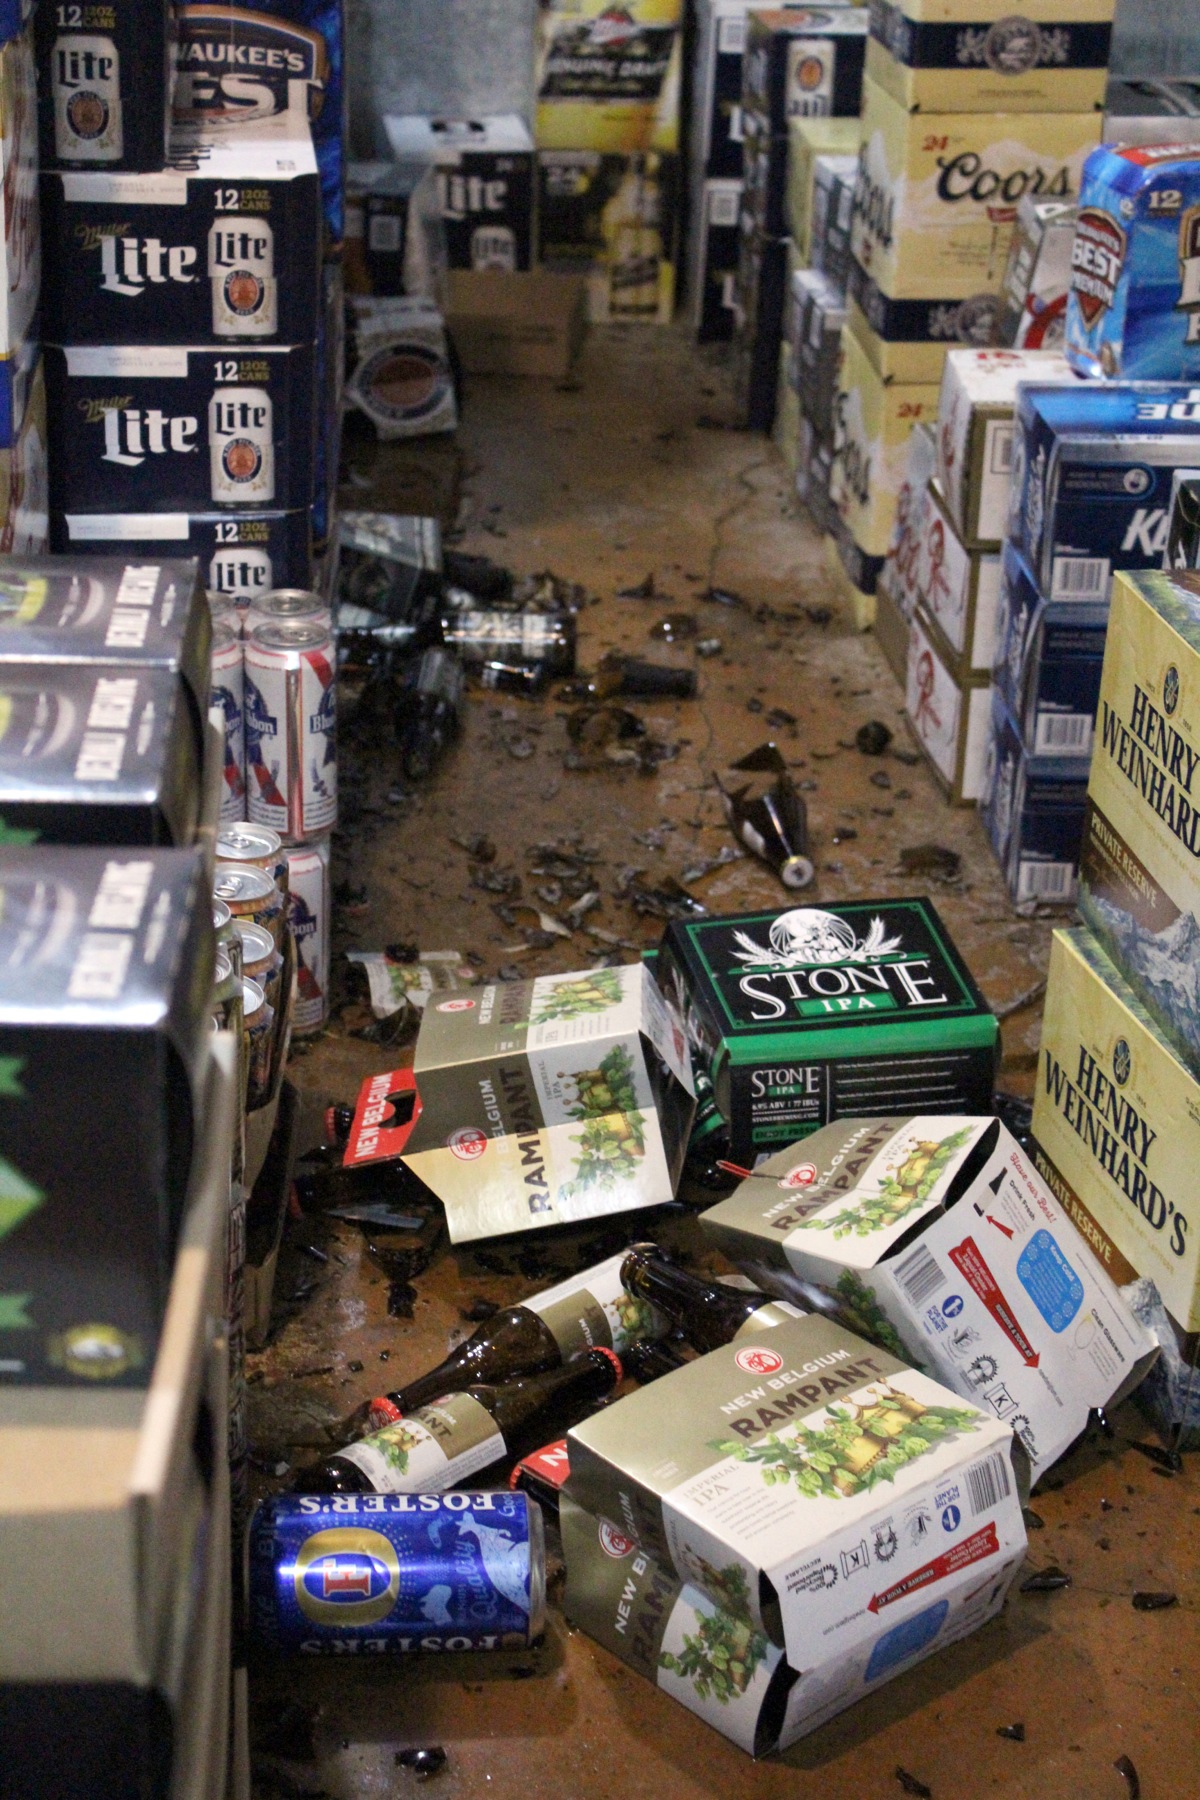 The East End Grop shop smells of alcohol, partially a result of their beer-soaked walk-in cooler. Bottles fell over, and the cases on the bottom layer of the stacks were crushed, releasing a pool of beer onto the floor.-Photo by Anna Frost, Homer News